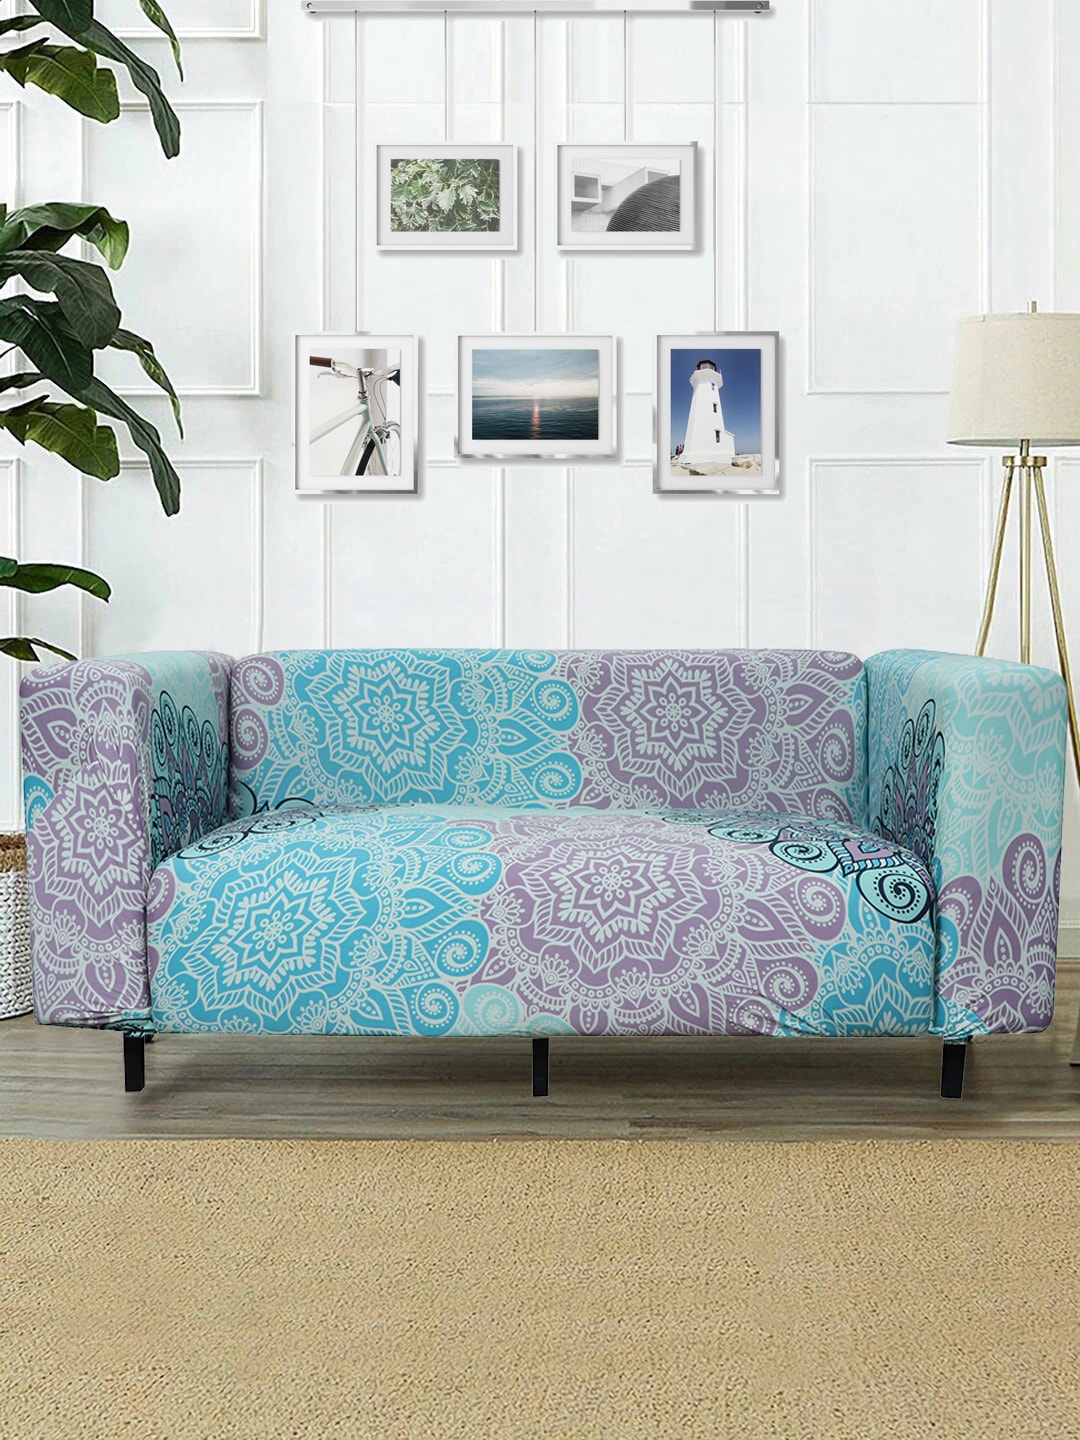 HOUSE OF QUIRK Green Printed Sofa Cover Price in India